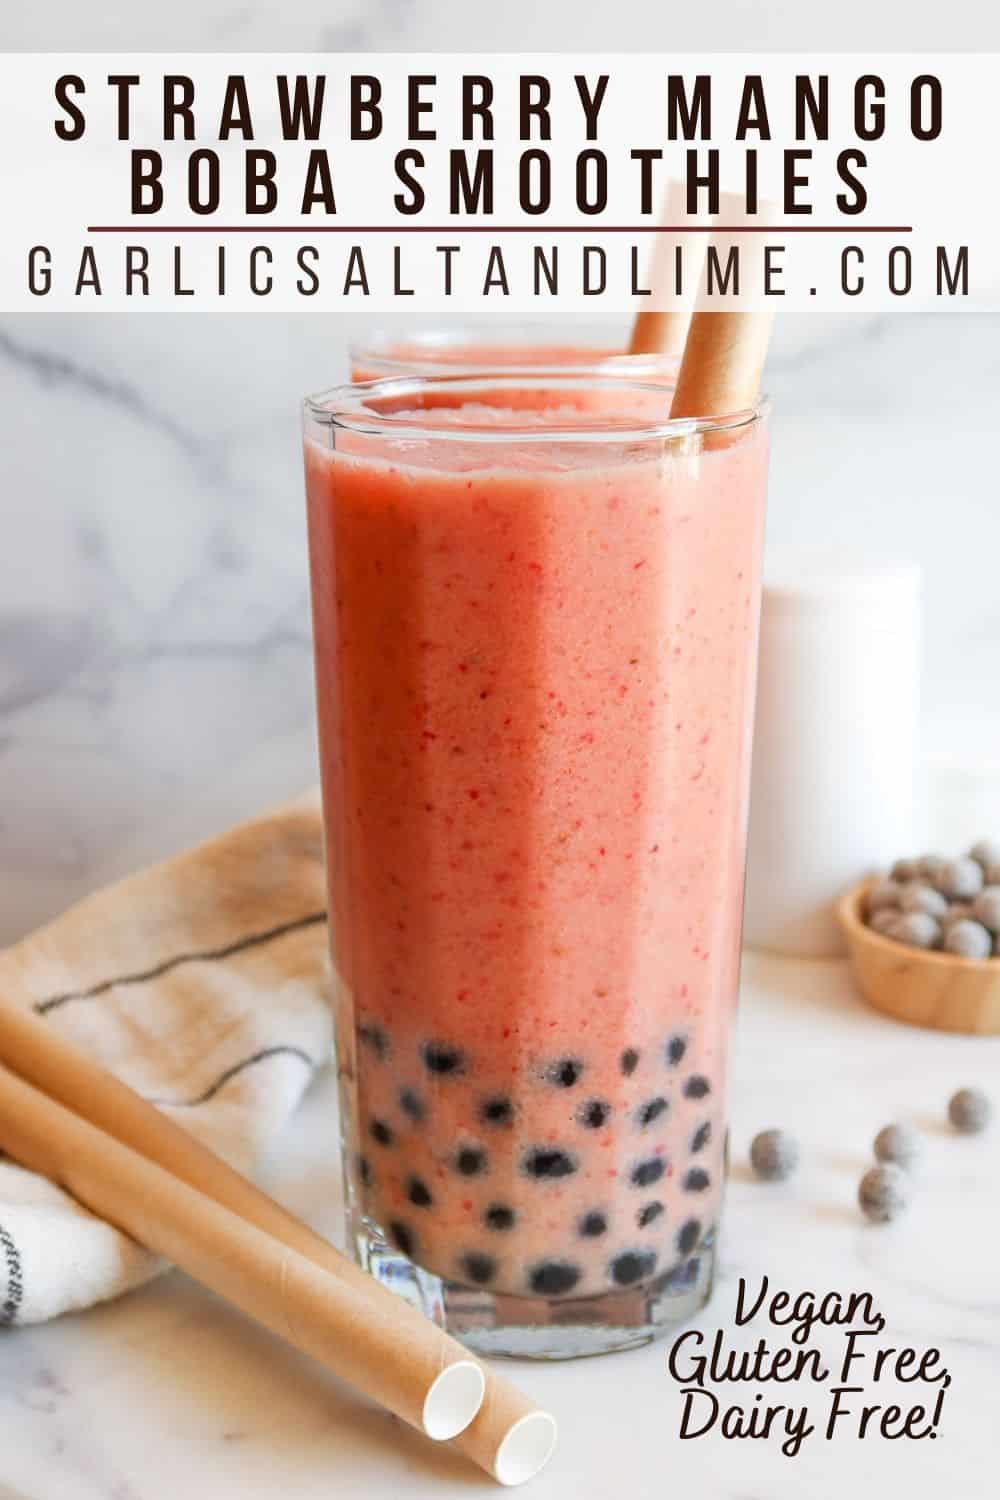 Strawberry mango boba smoothies with text overlay for Pinterest.